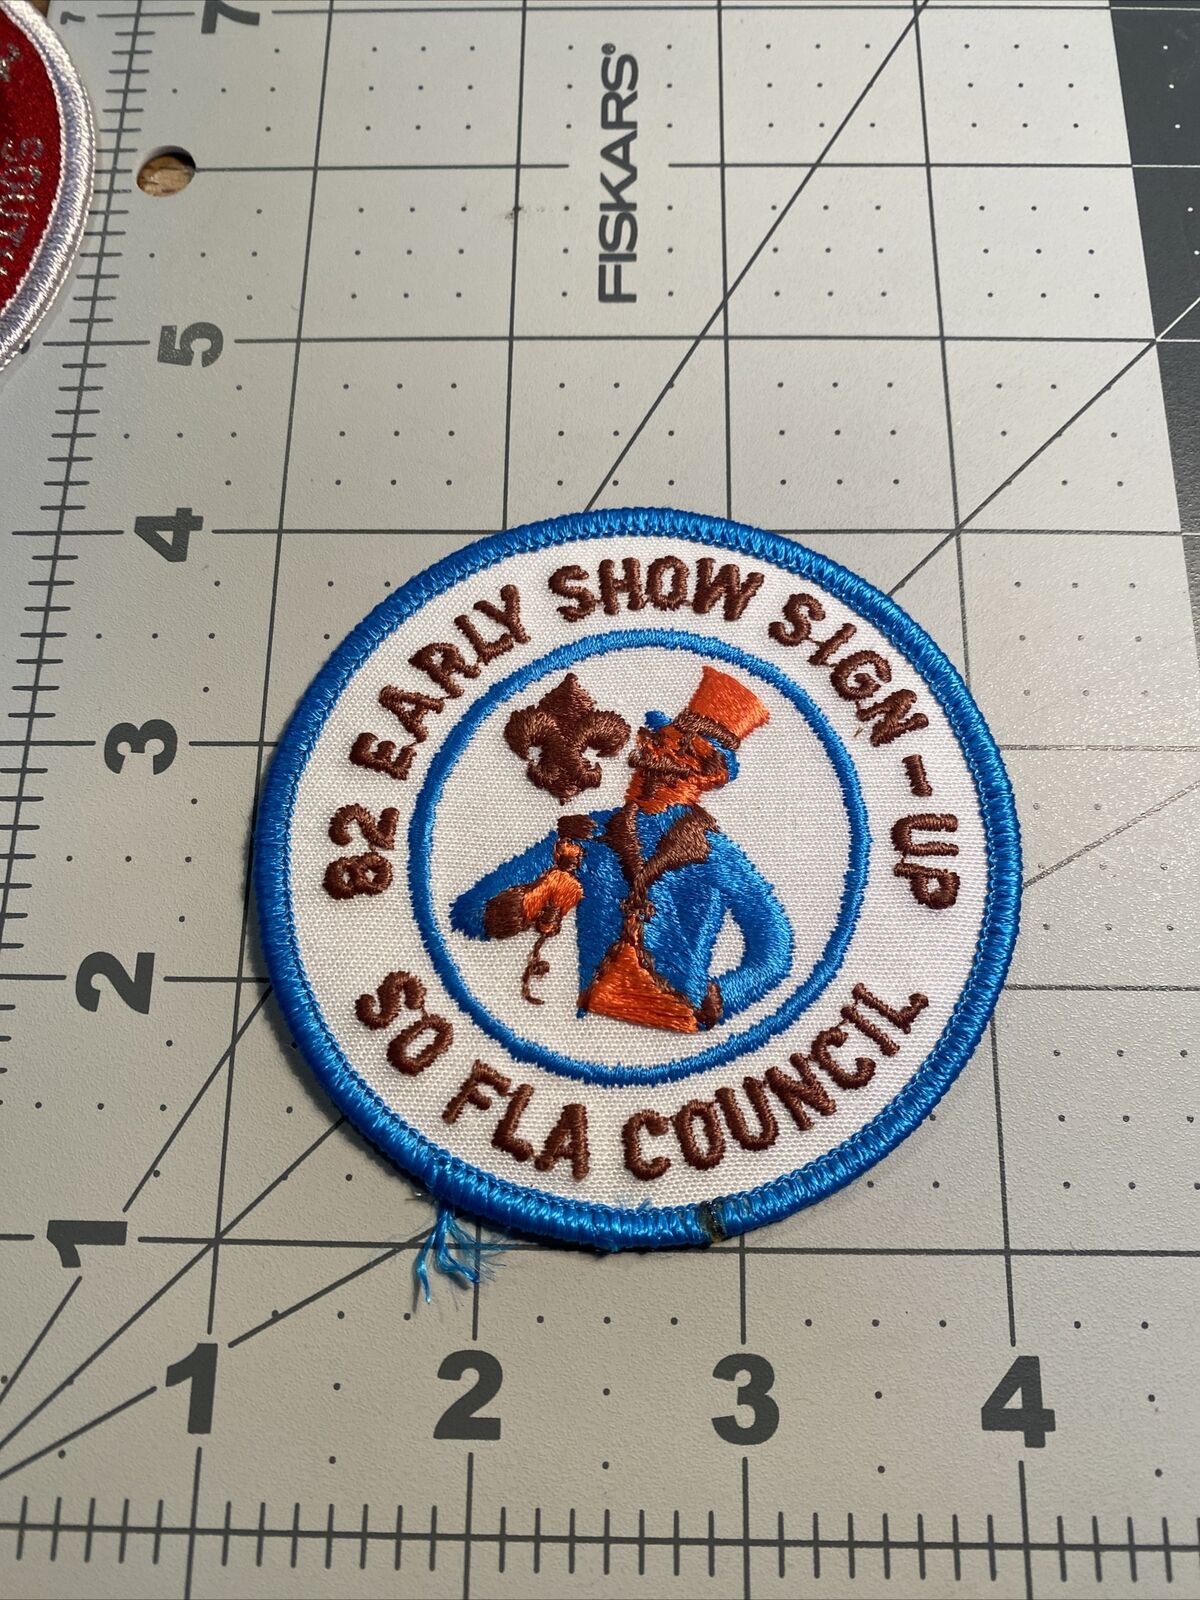 1982 South Florida Council Early Show Sign Up BSA Boy Scouts of America ABE-550G